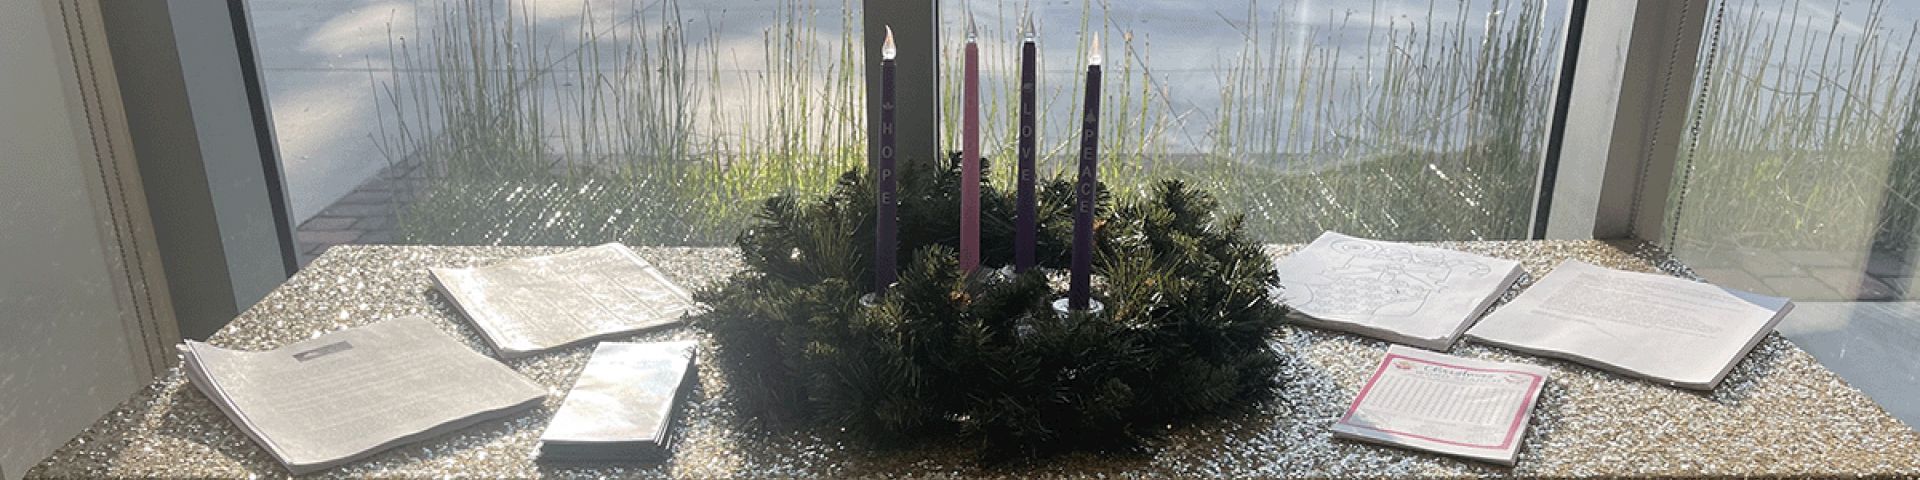 Menorahs, kinaras and advent wreaths were displayed throughout the health system on their proper dates during Advent and Hanukah.